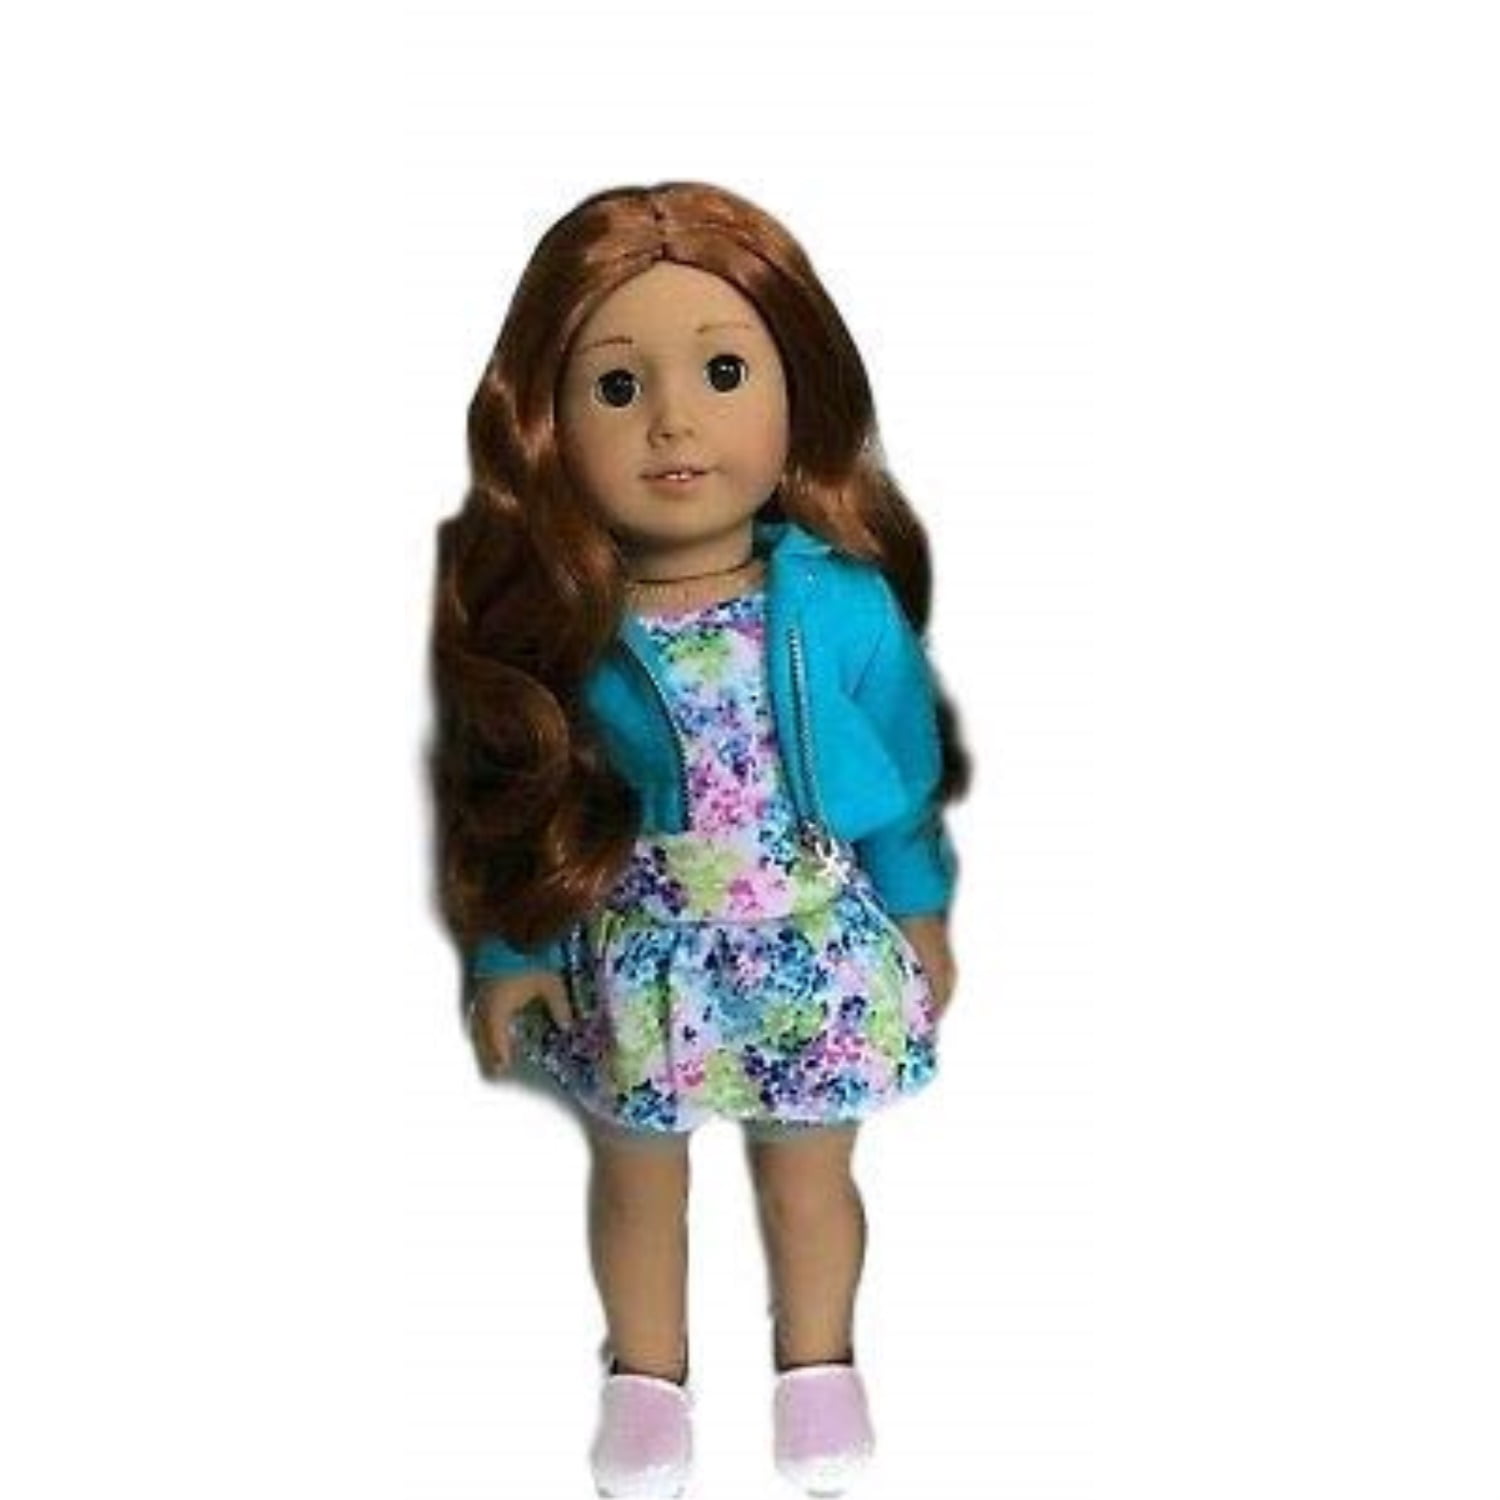 american girl doll with red hair